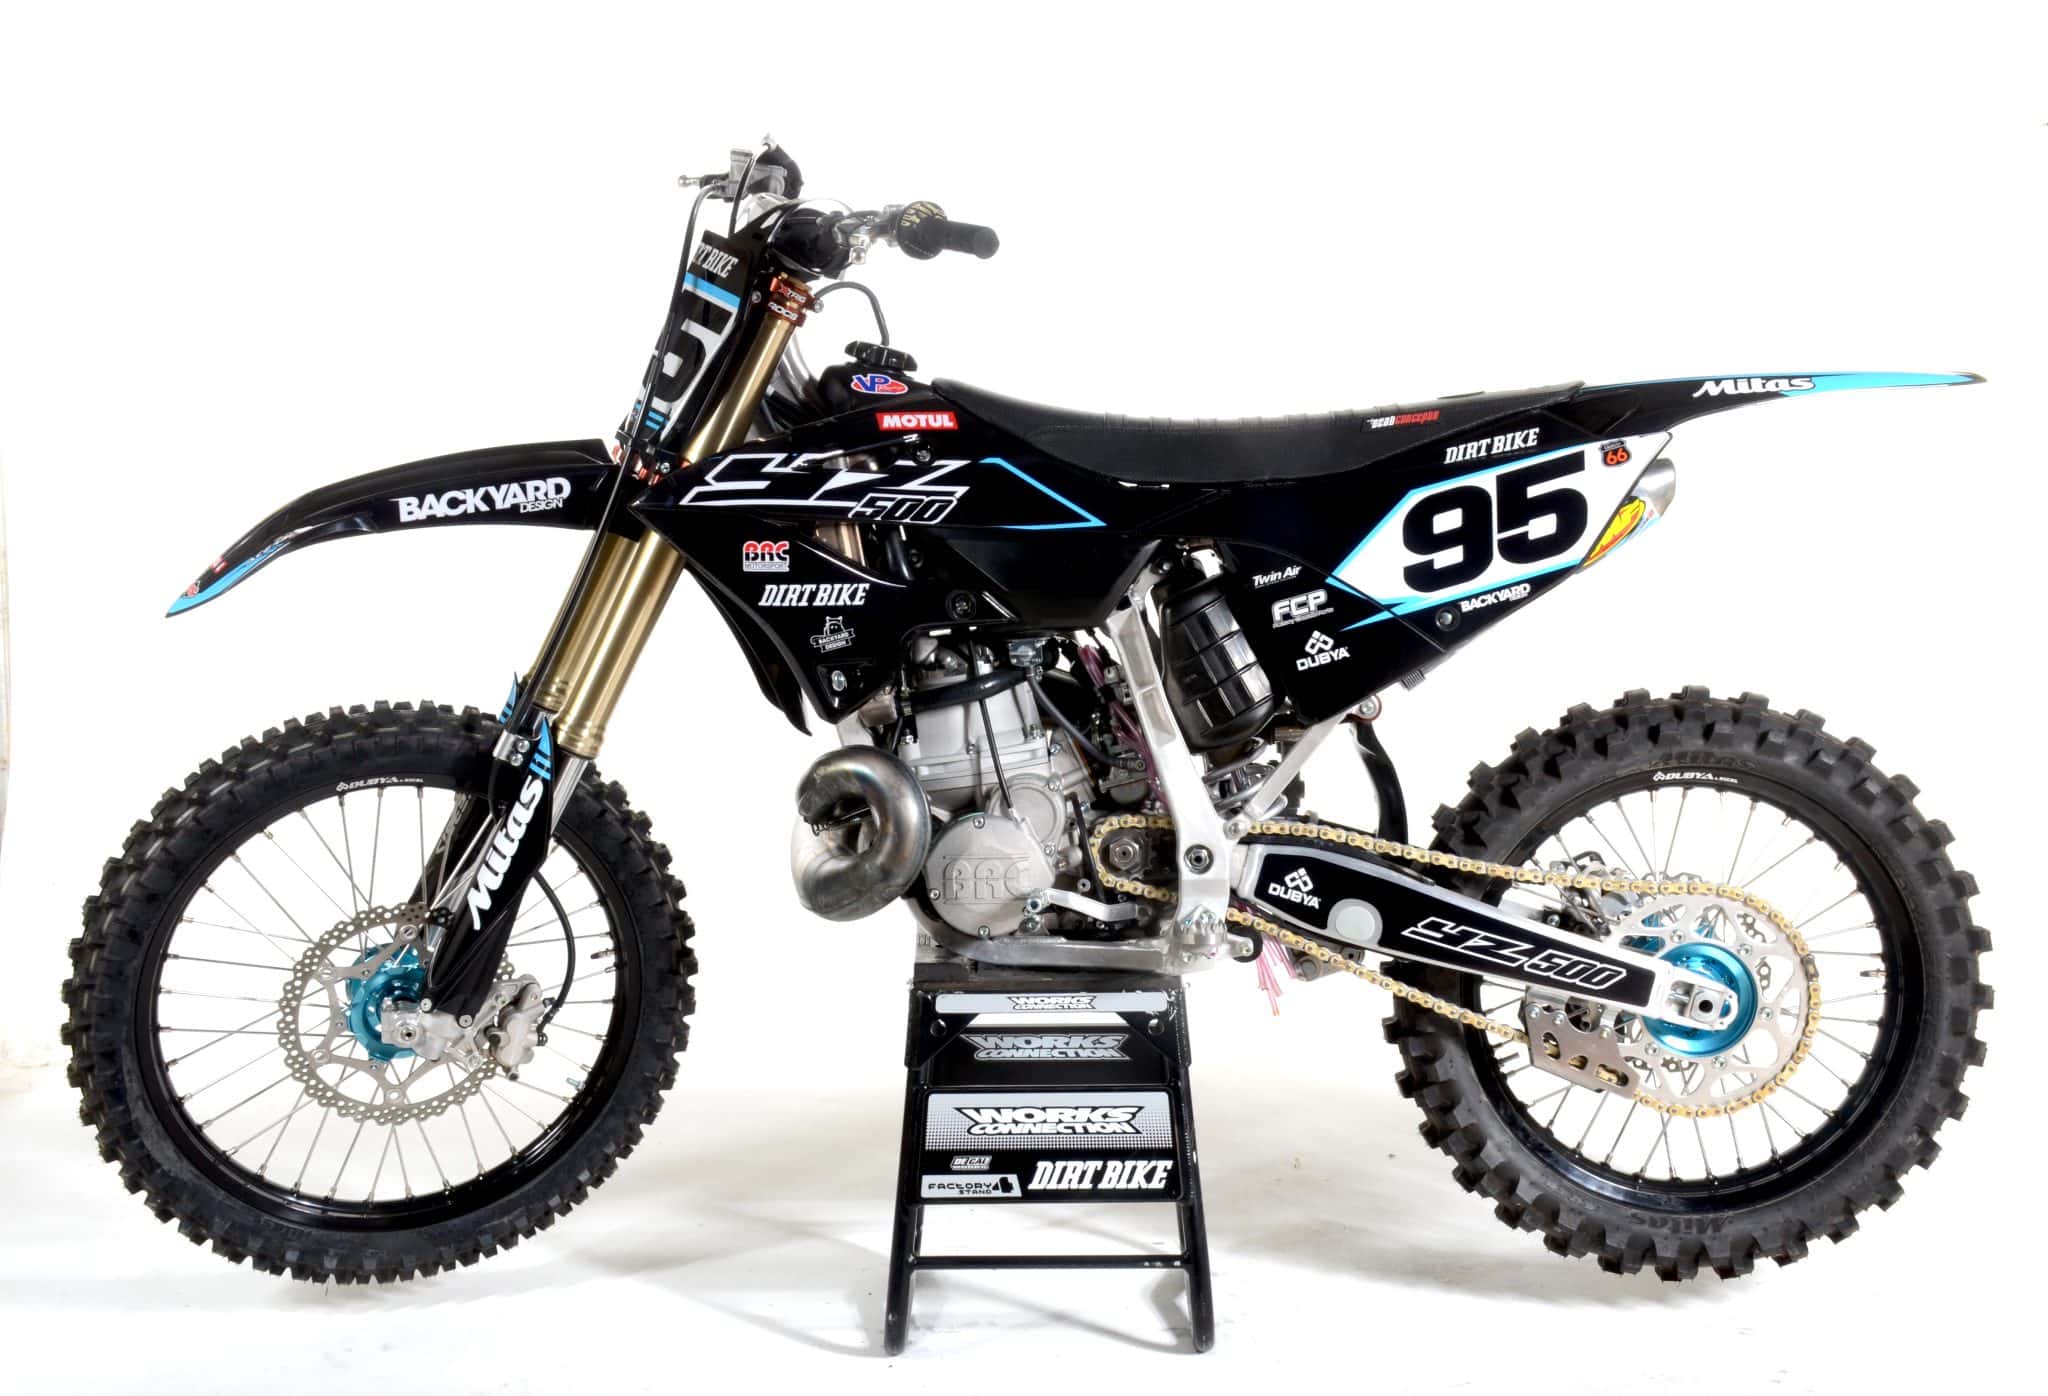 Introducing the Game-Changing YZ500 Two-Stroke Project